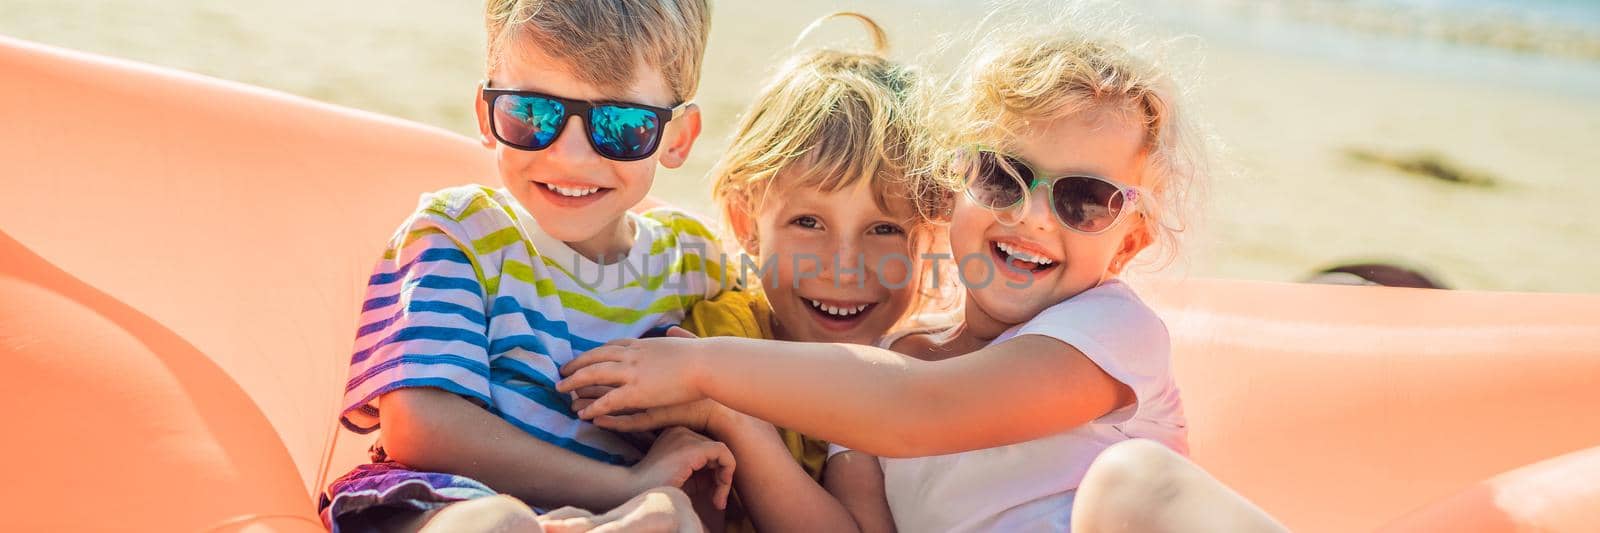 Children sit on an inflatable sofa against the sea and have fun. BANNER, LONG FORMAT